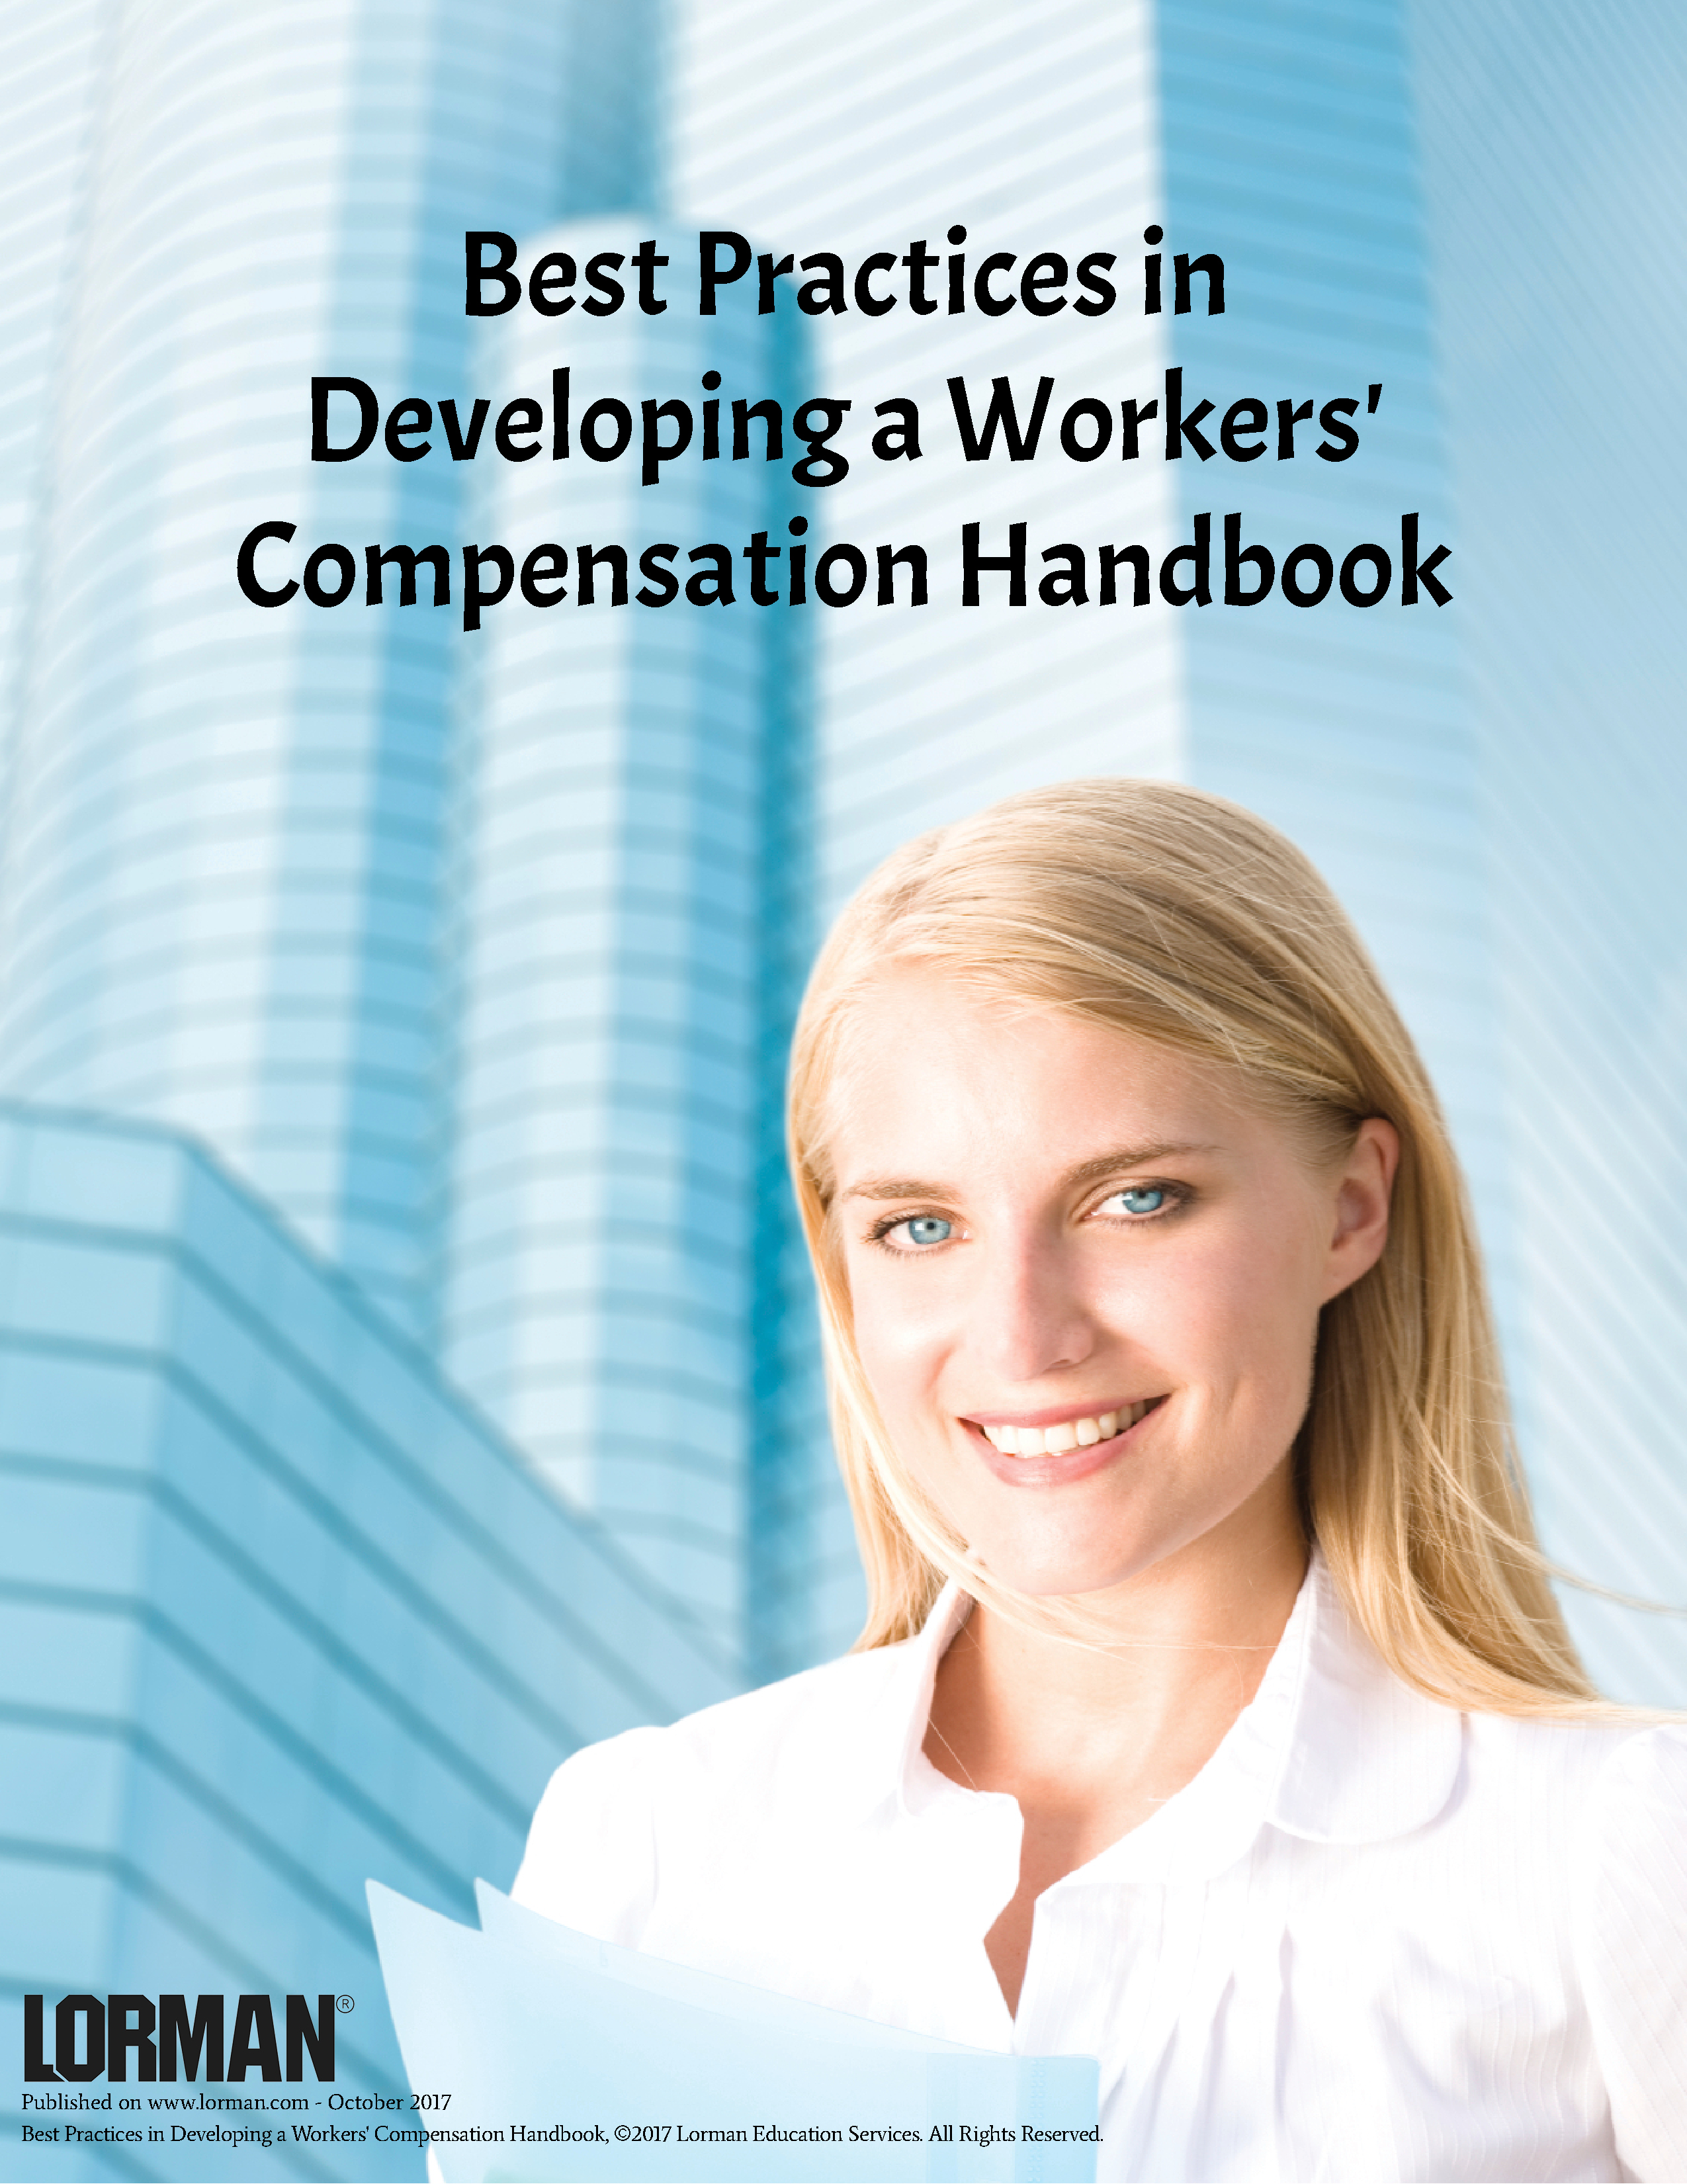 Best Practices in Developing a Workers' Compensation Handbook